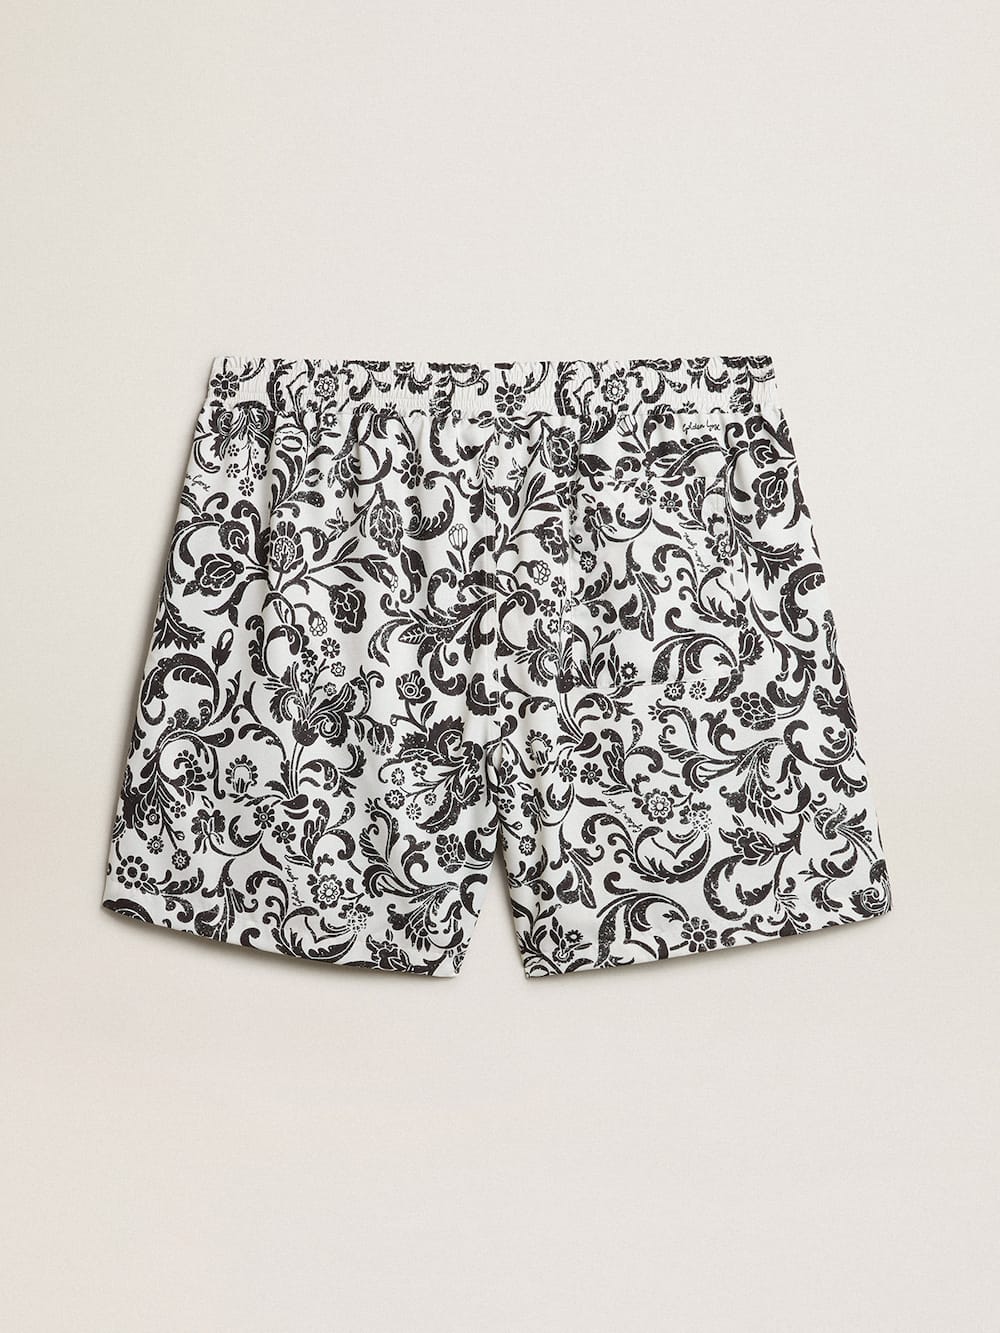 Golden Goose - Swim shorts with all-over black and white print in 